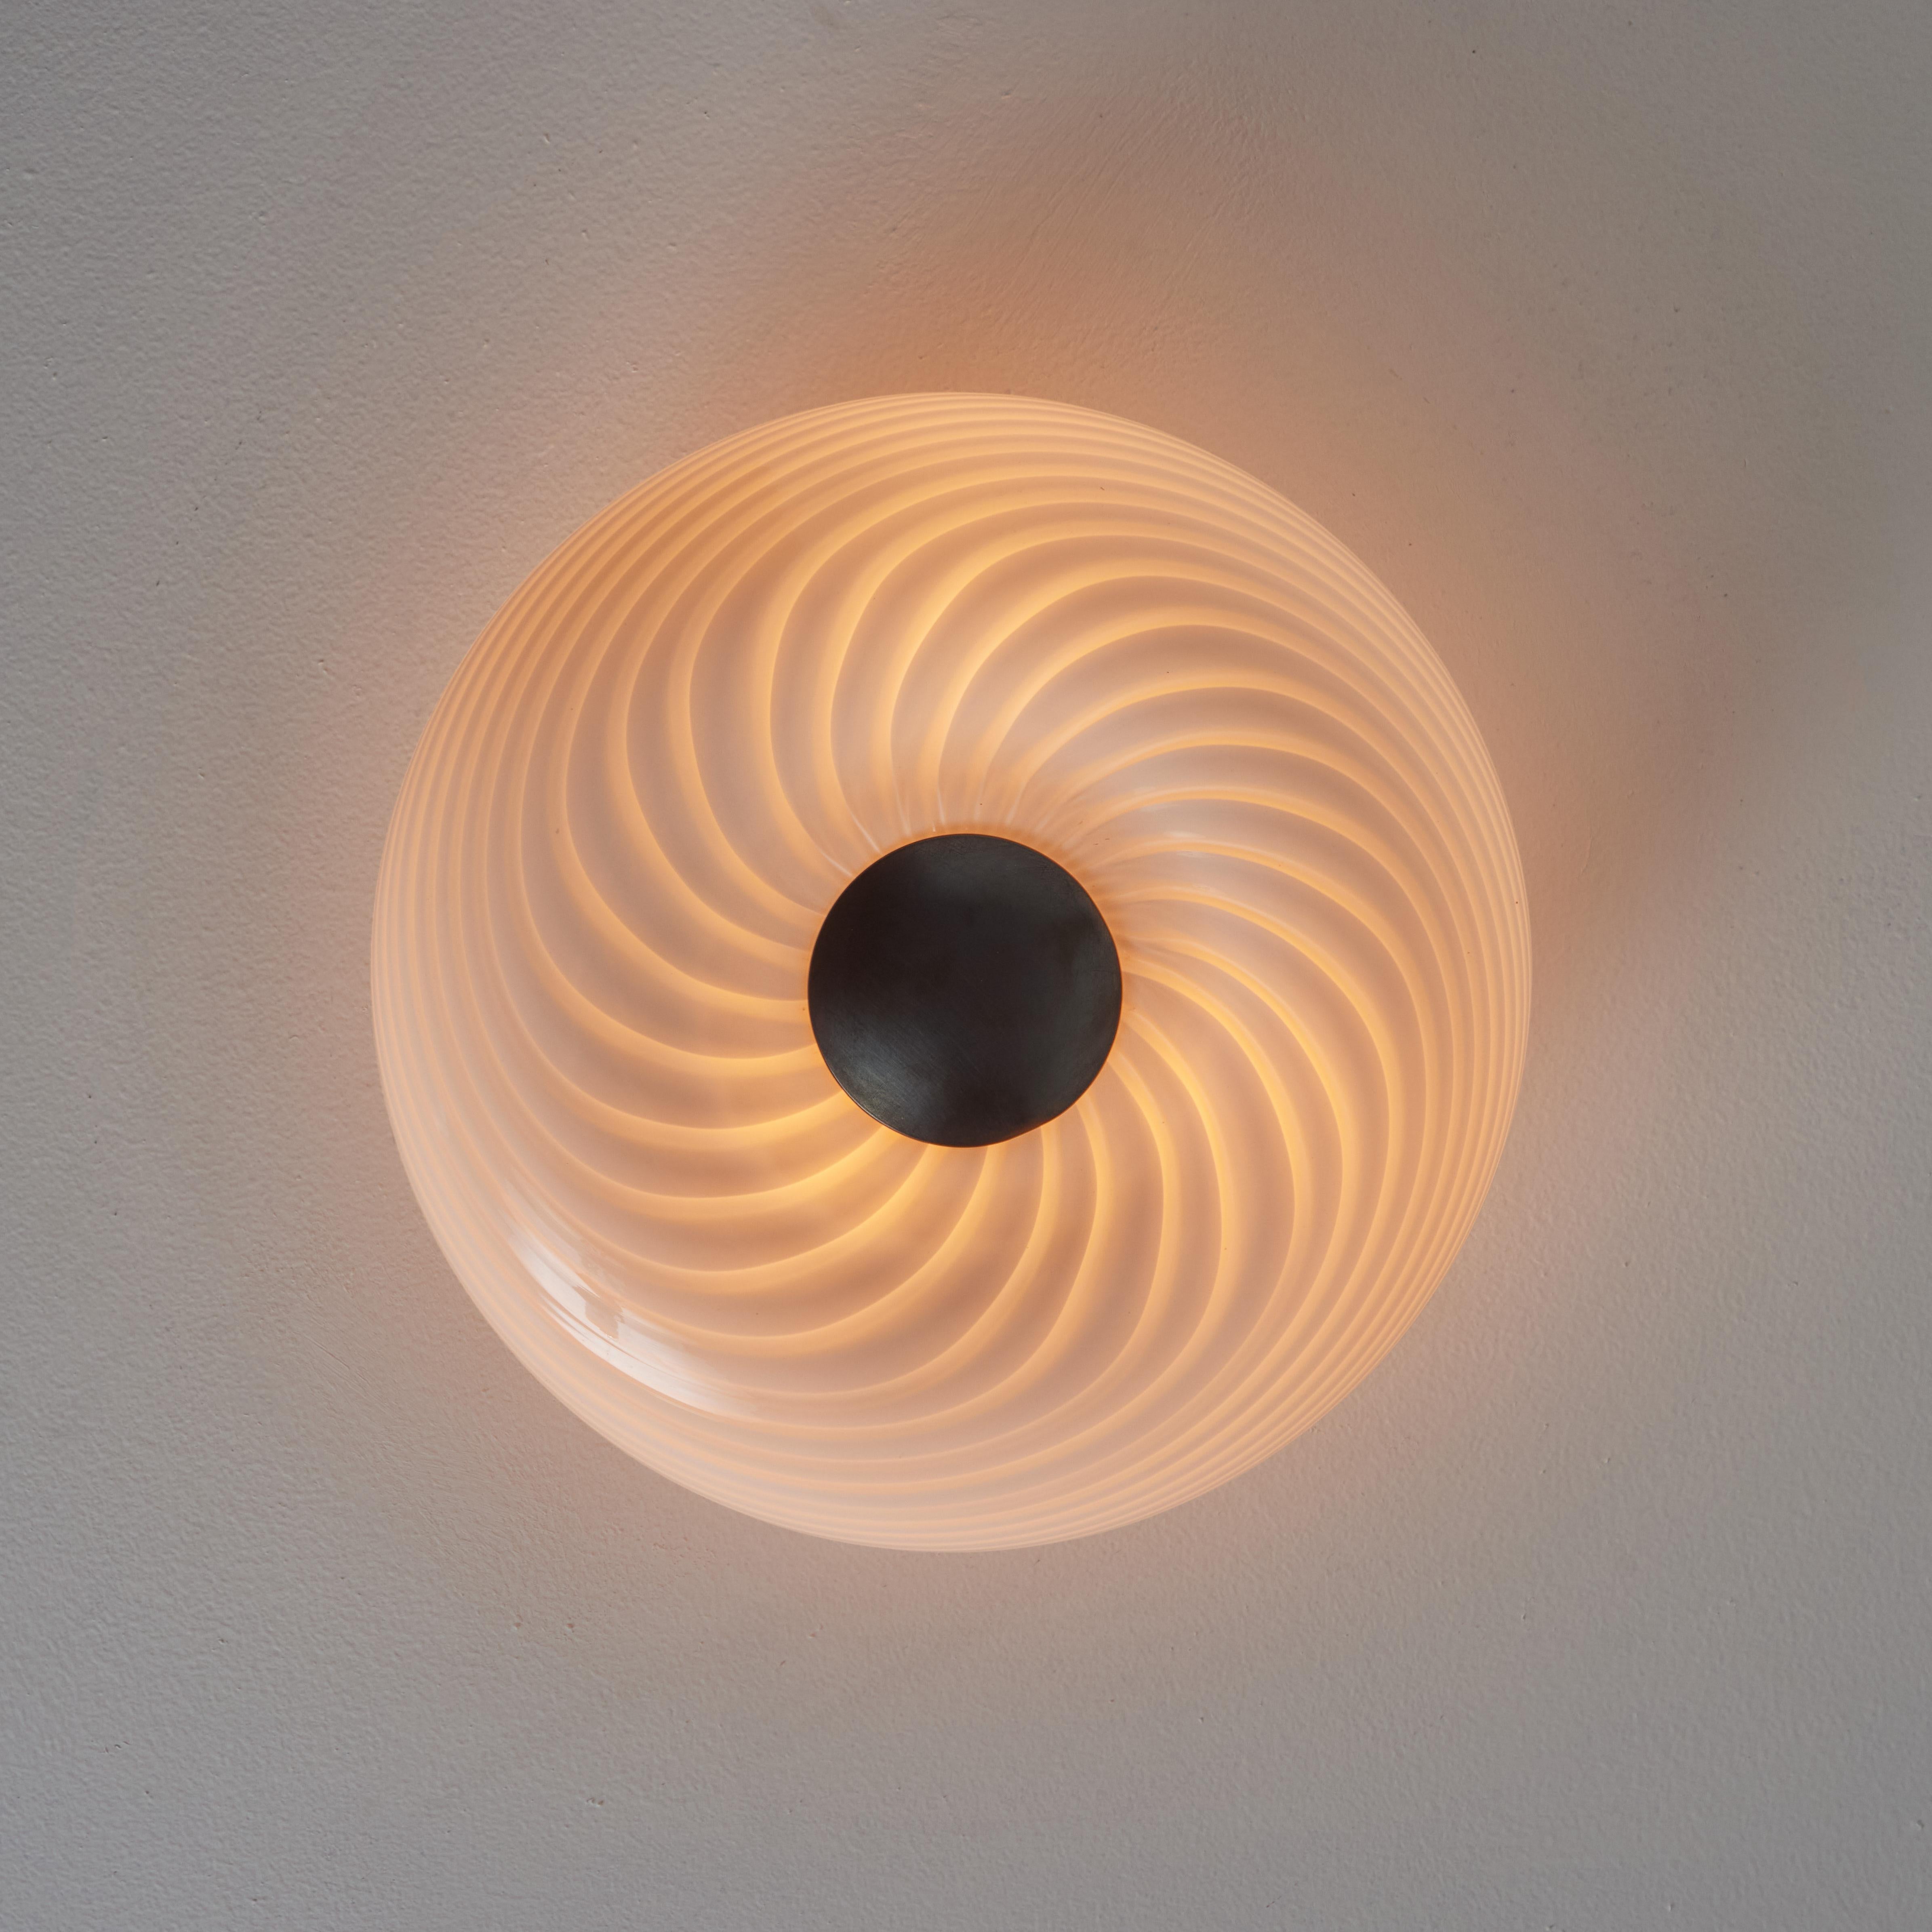 1960s Vistosi Blown Murano Glass Wall or Ceiling Light.

Executed in blown Murano glass with a patinated brass centerpiece, this rare flush mount features a distinctive spiral pattern and can be installed on either the wall or the ceiling. Its